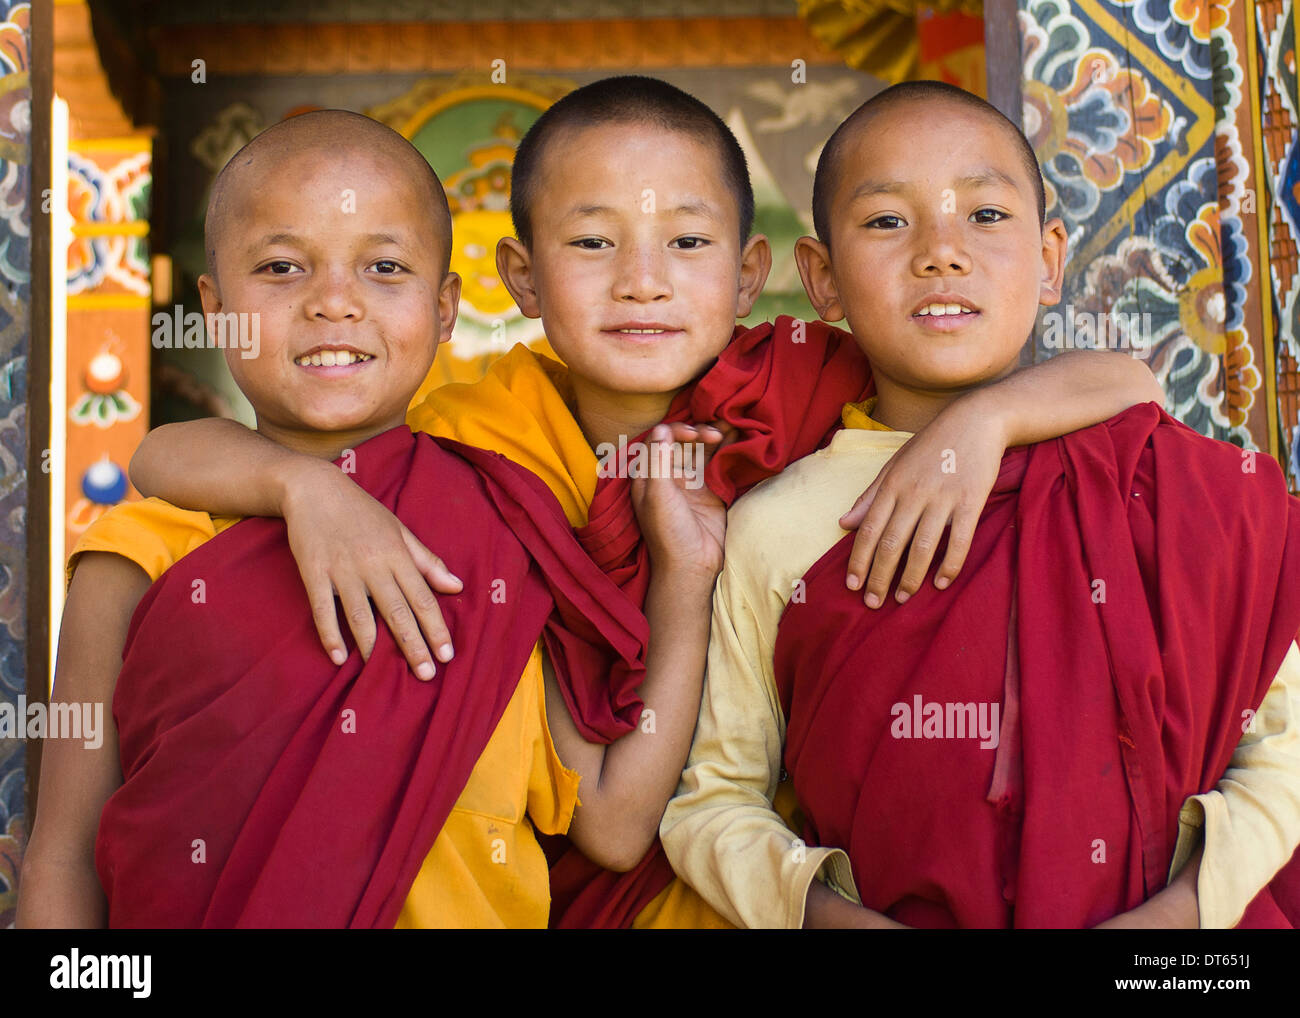 Bhutan, South Asia, Punakha, Three young novice boy monks standing in doorway of Chimi Lakhang temple in the old capital. Stock Photo